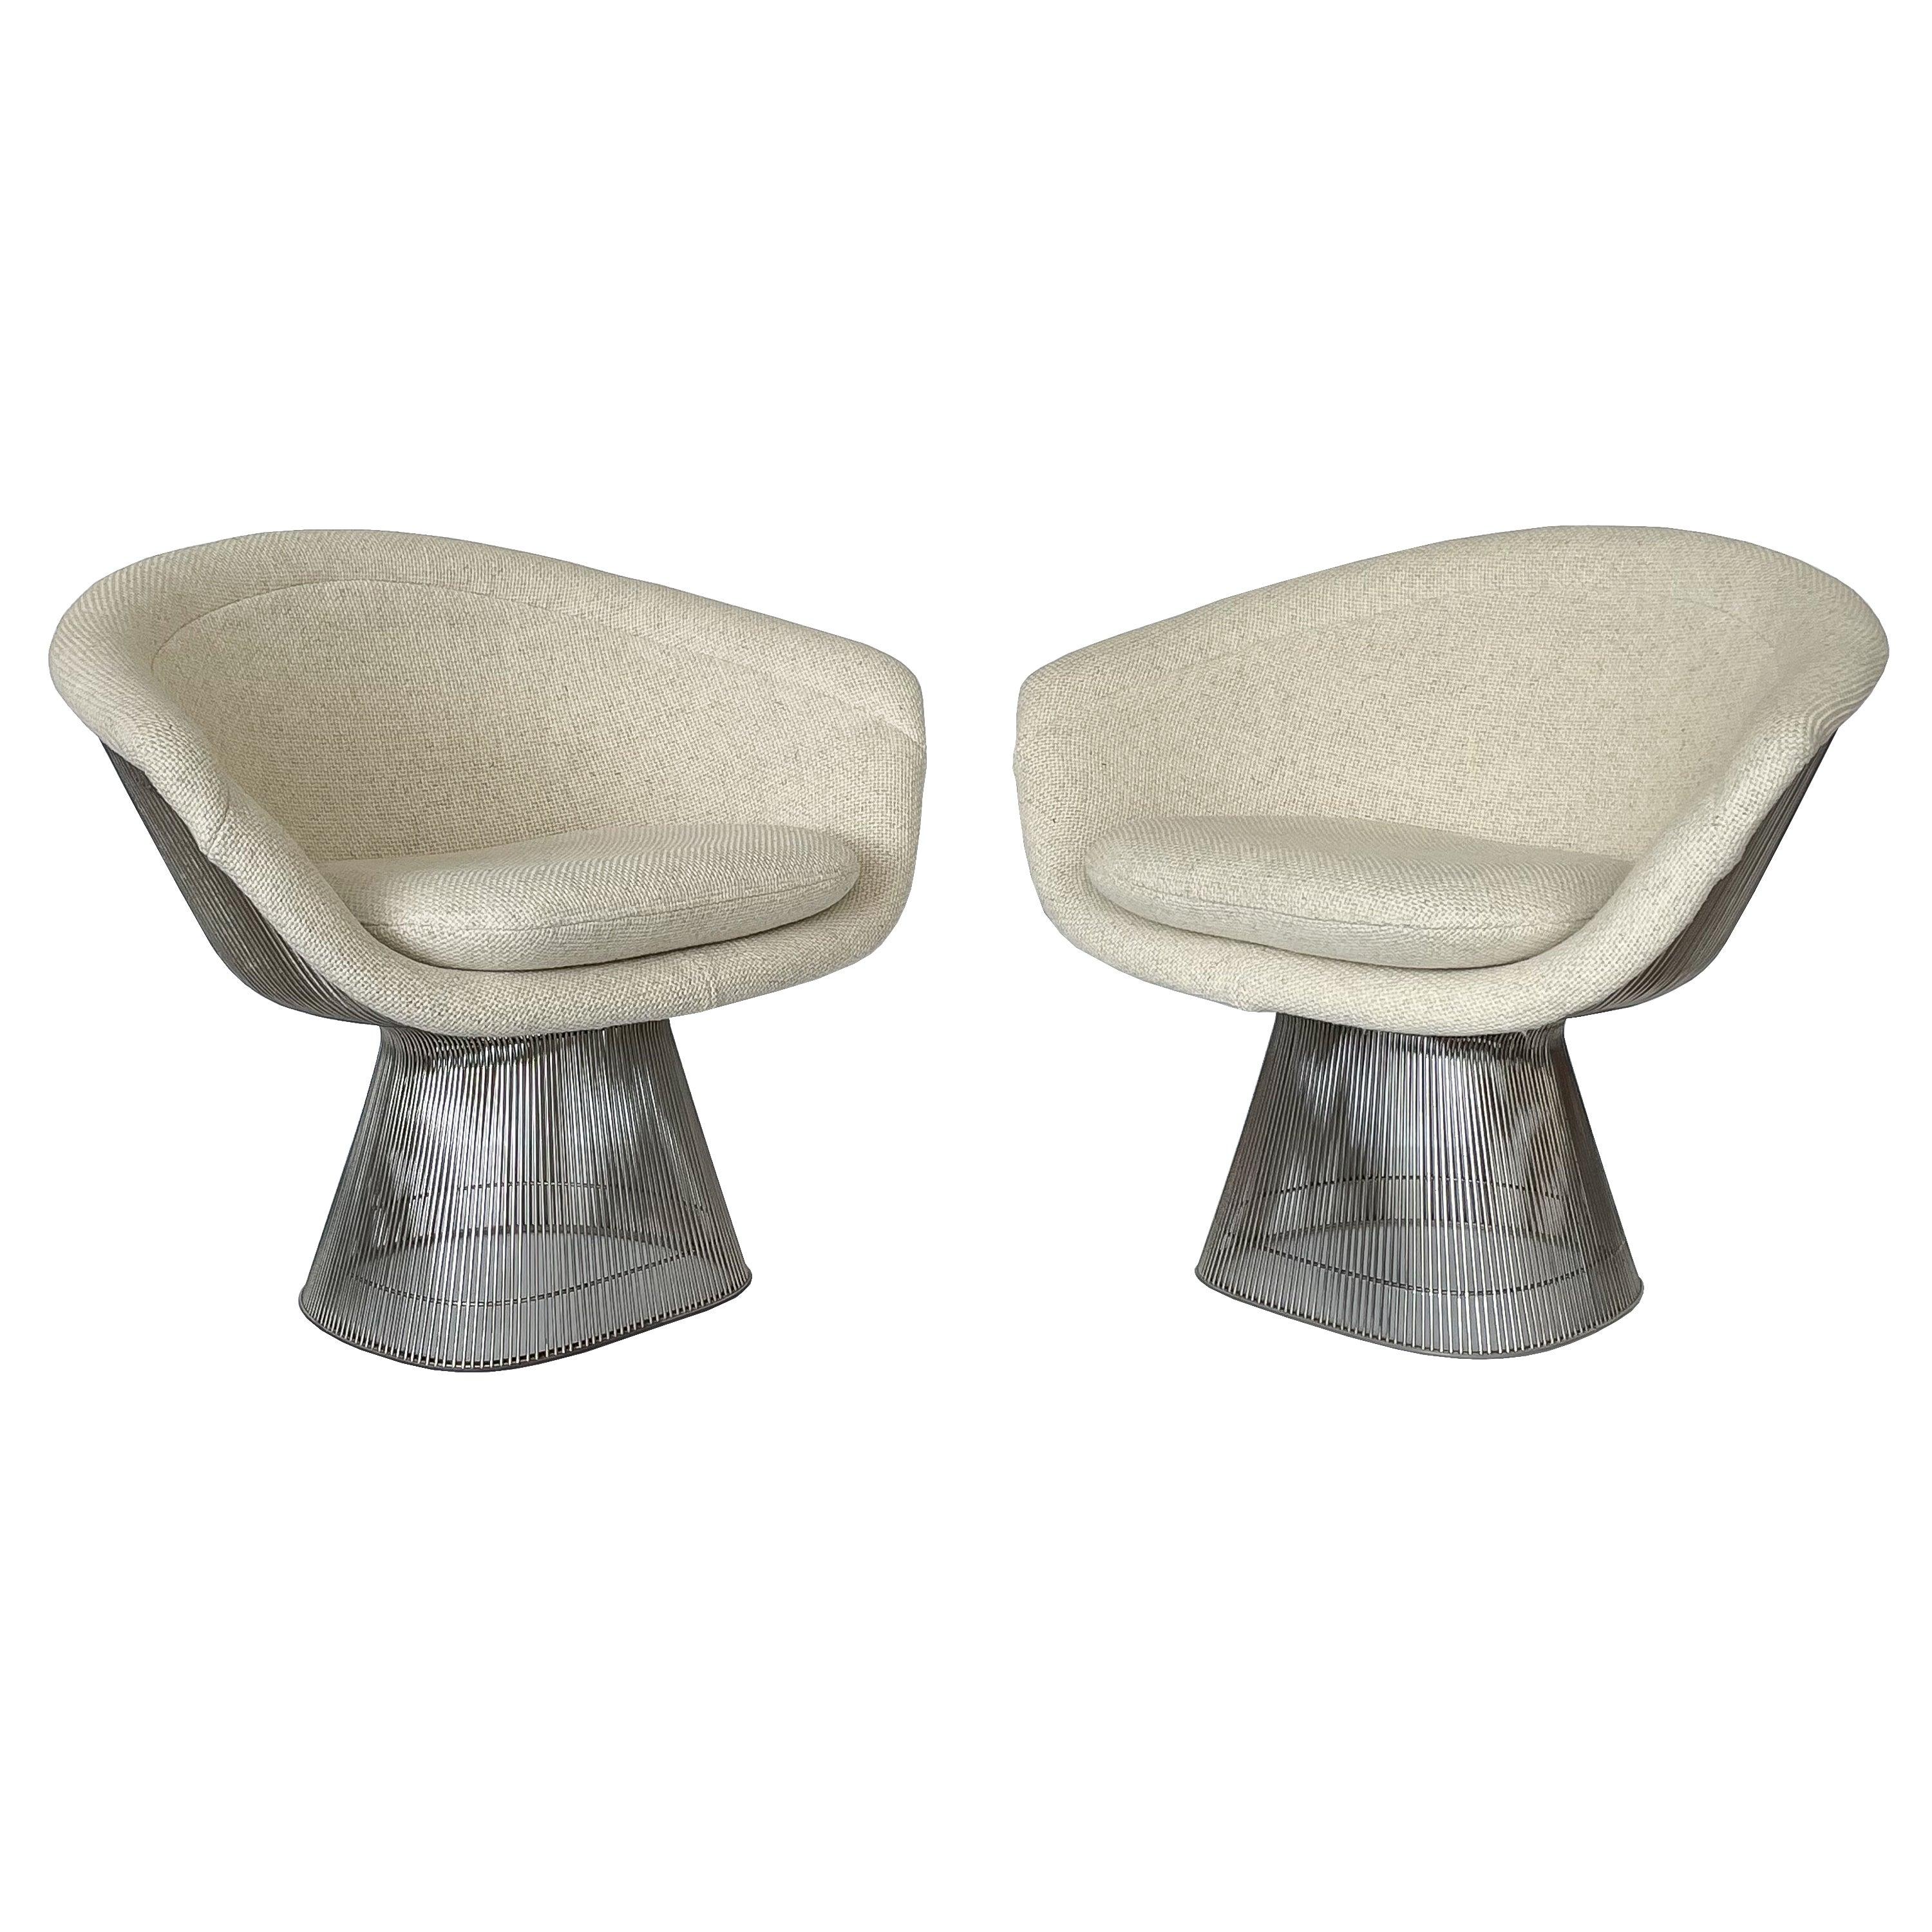 Pair of Early Warren Platner Wire Lounge Chairs for Knoll